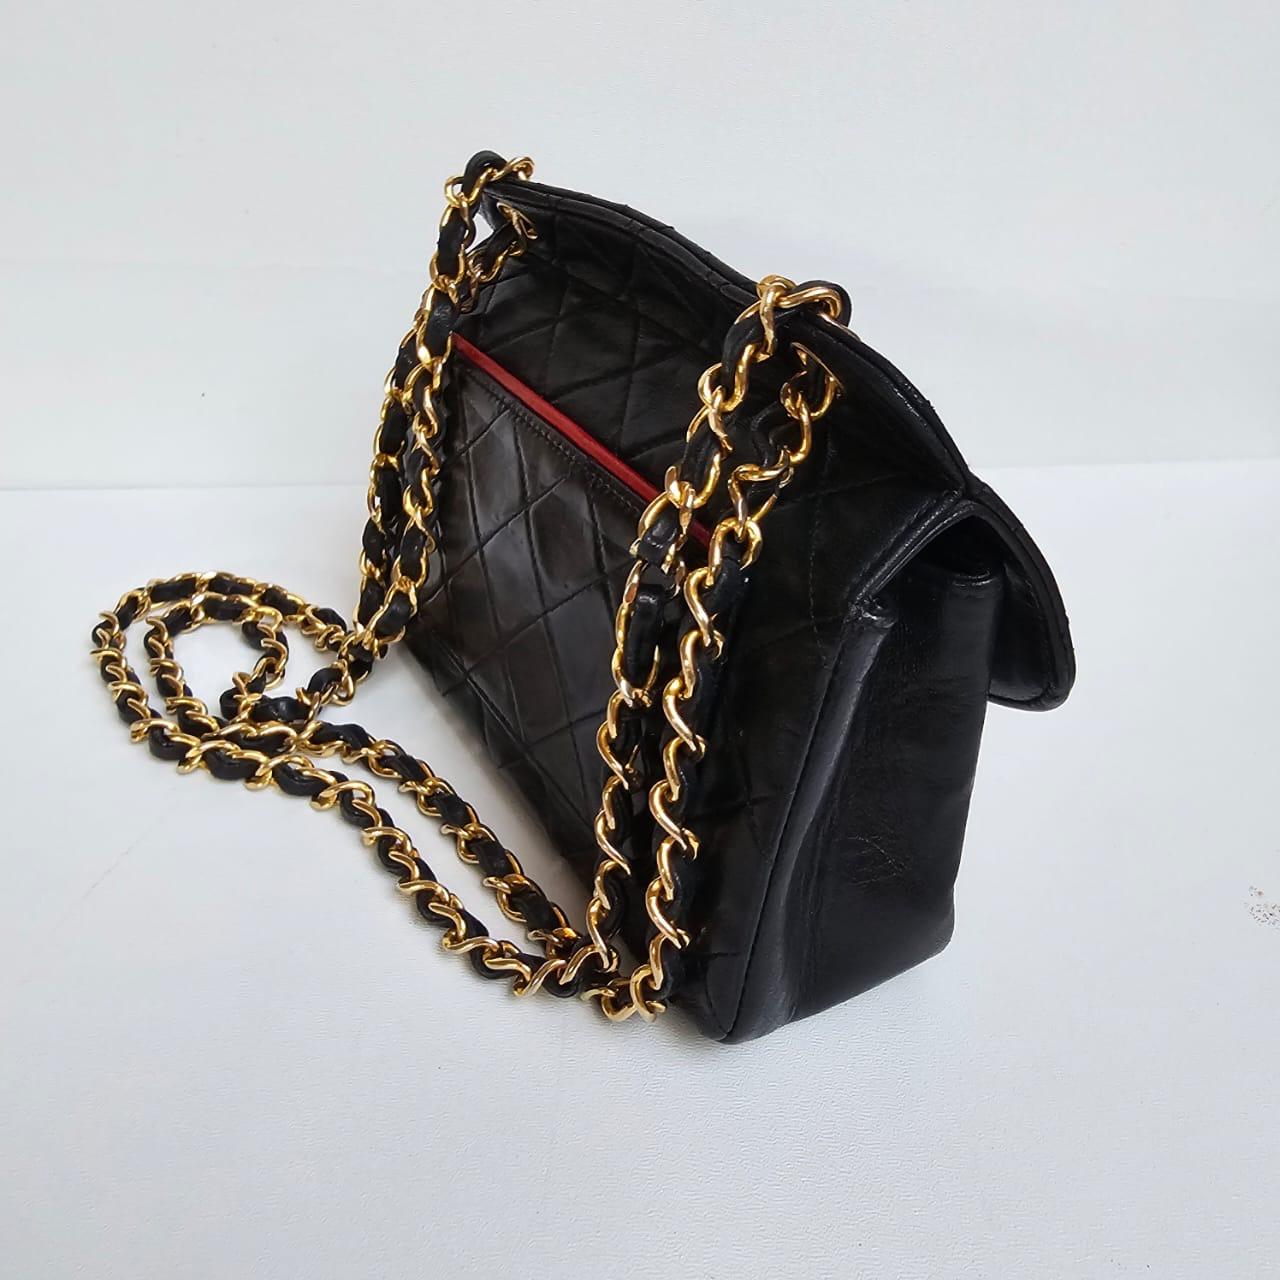 Vintage Chanel Black Lambskin Quilted Mini Flap Bag For Sale 4